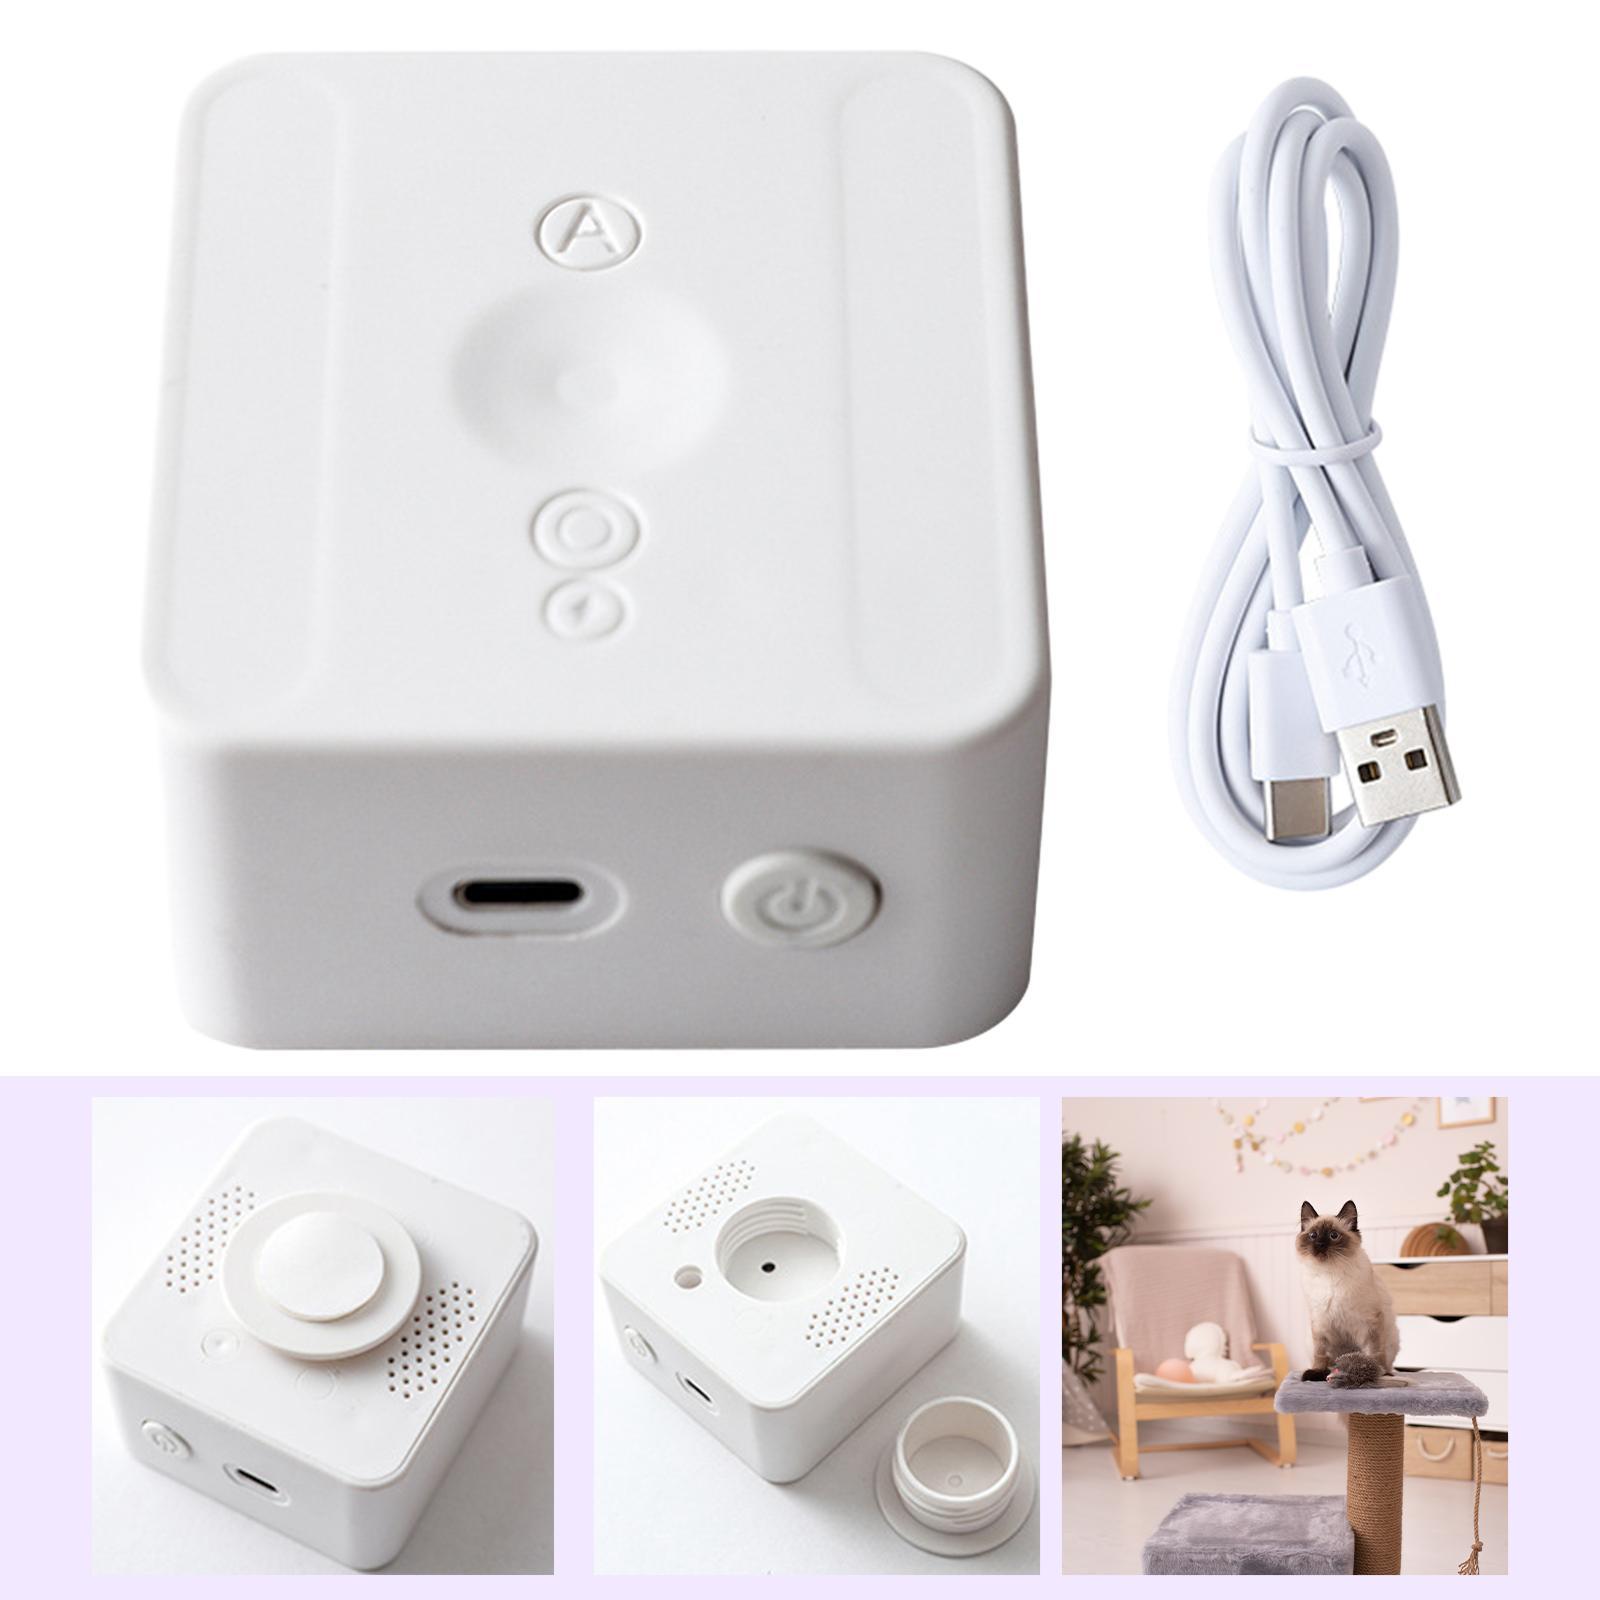 Cat Litter Odor Removal Smart USB Charging for Wardrobe Small Area Bathroom